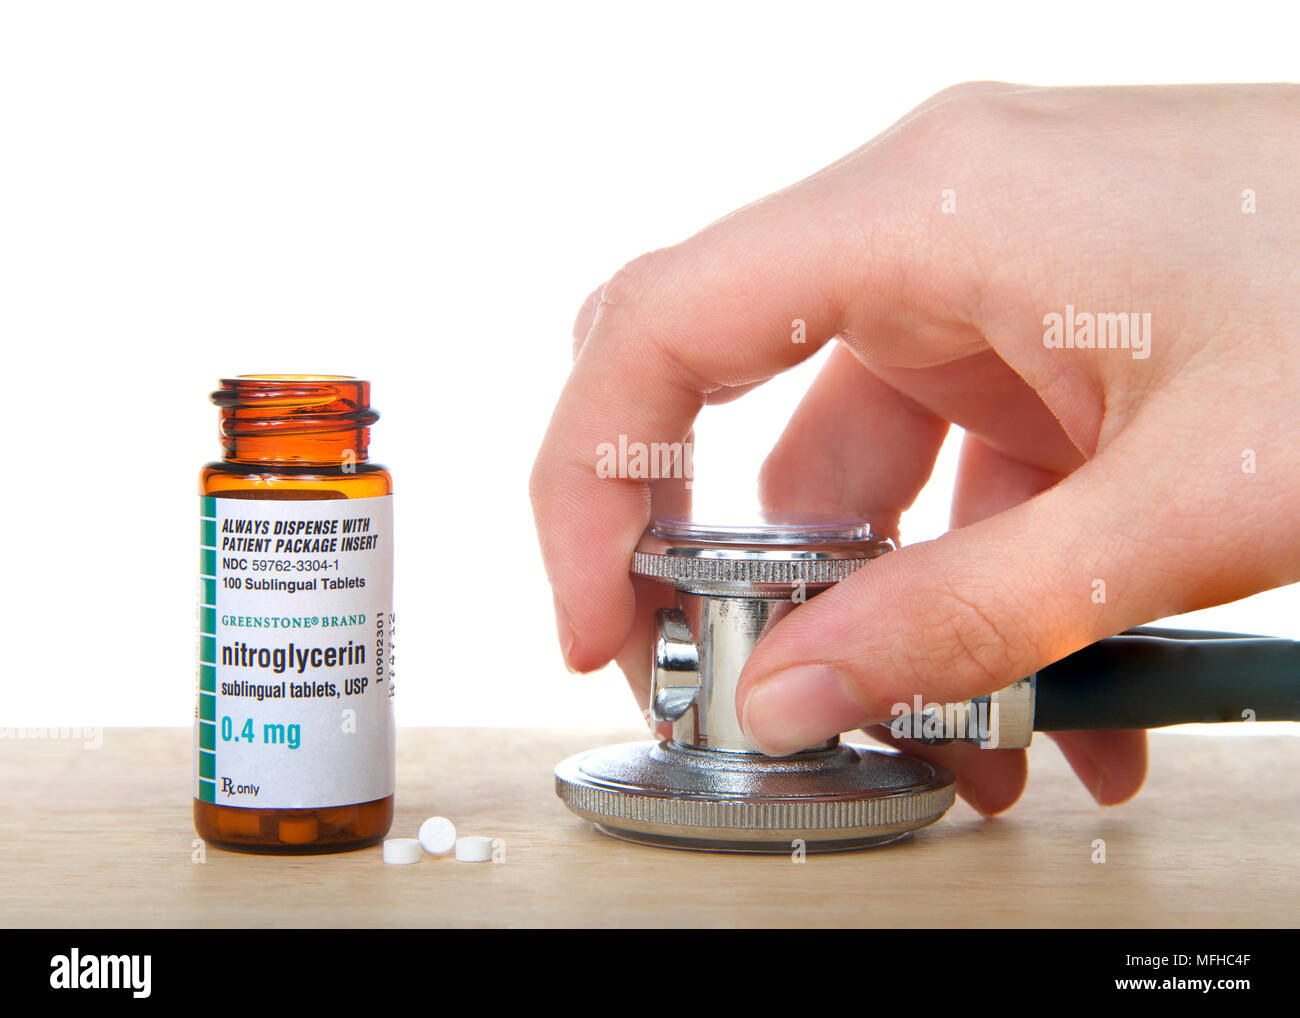 Alameda, CA - April 18, 2018: Bottle of Nitroglycerin tabs on wood table with 3 pills next to bottle and hand holding stethoscope. Nitro is used to tr Stock Photo